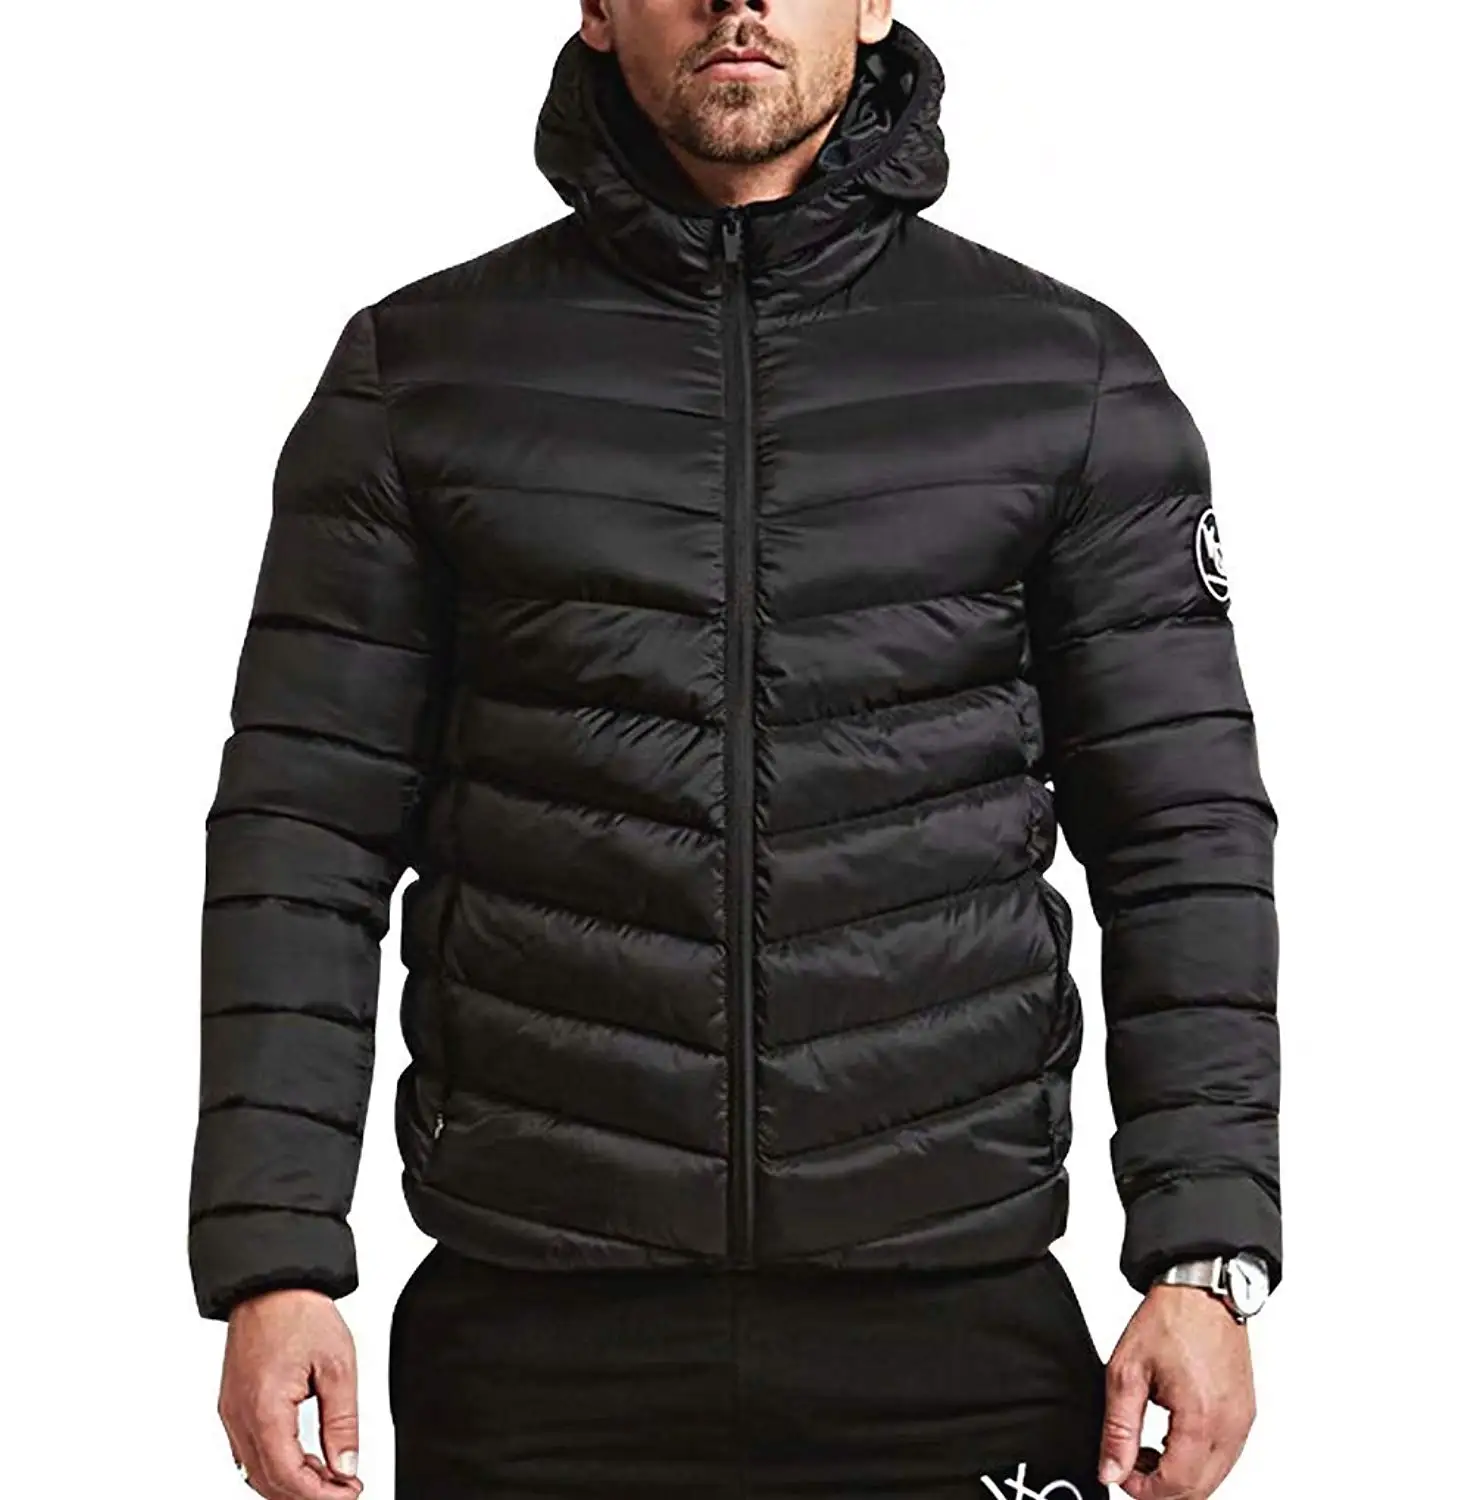 Buy SUSIELADY Mens Packable Down Jacket Winter Warm Cotton Puffer Coat ...